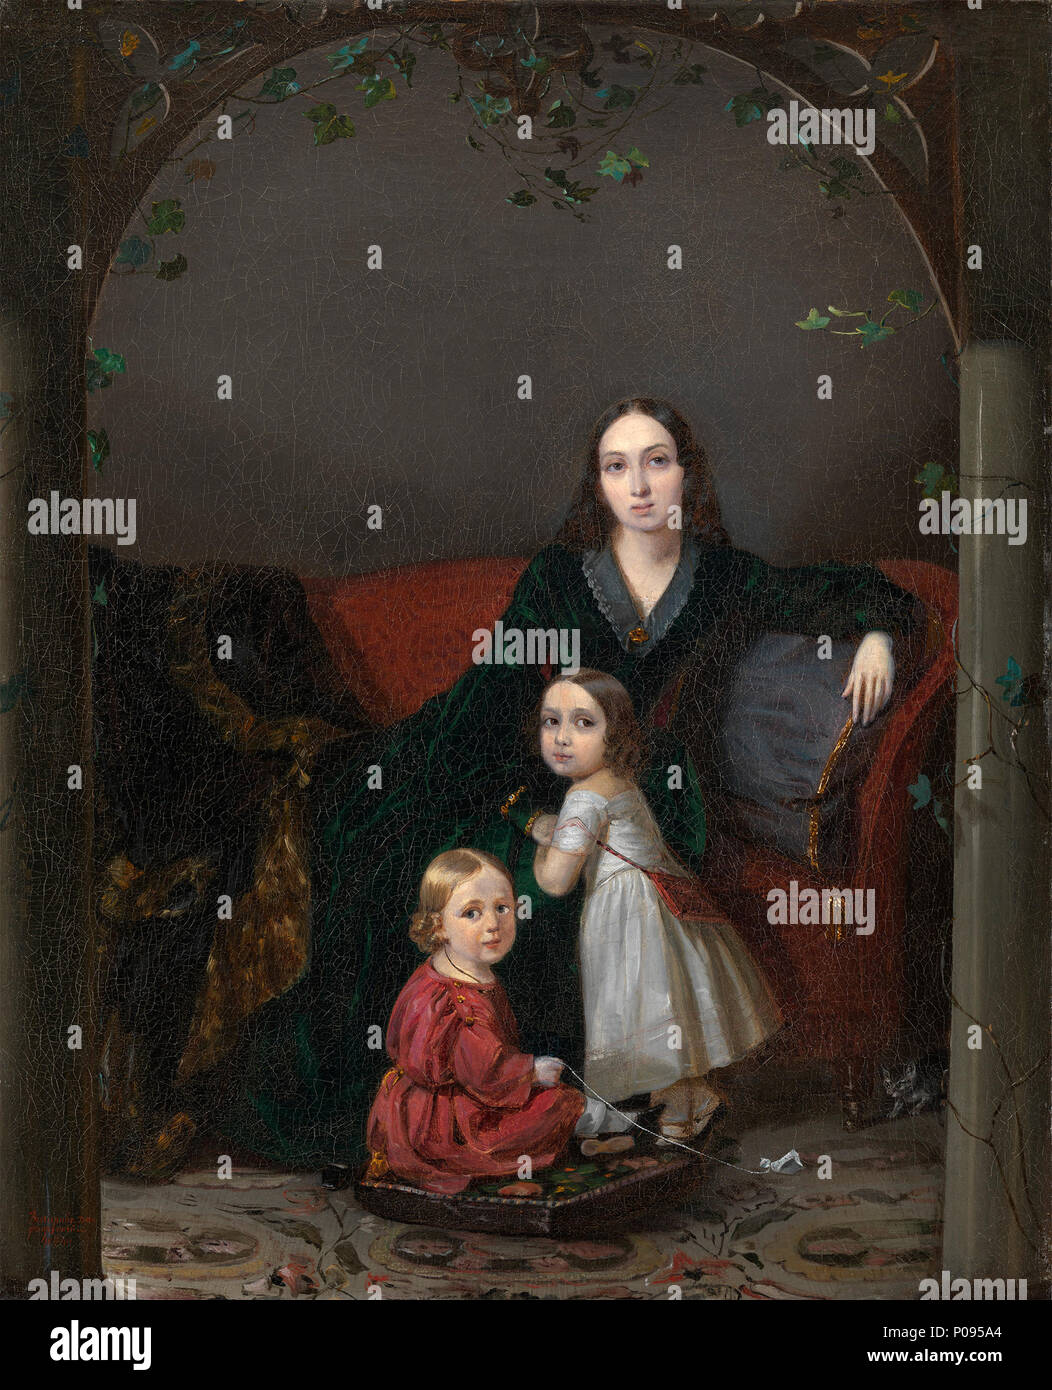 .  English: ZAKHAROV, PETR (1816-1846) Portrait of Anna Grigorievna Ermolova (1807—1852), née Obolonskaya, with Her Children, signed 'Zakharov.Da=/dayurtskii.-' and dated '18 IV/X 40'. ZAKHAROV, PETR (1816-1846) Portrait of Anna Grigorievna Ermolova with Her Children, signed 'Zakharov.Da=/dayurtskii.-' and dated '18 IV/X 40'. 350,000–500,000 GBP Provenance: Collection of Ya.M. Shapiro, Moscow. Private collection, Europe. Authenticity of the work has been confirmed by the experts L. Markina and I. Lomize. Exhibited: Vystavka P.Z. Zakharova-Chechentsa, Museum of V.A. Tropinin, Moscow, December 1 Stock Photo